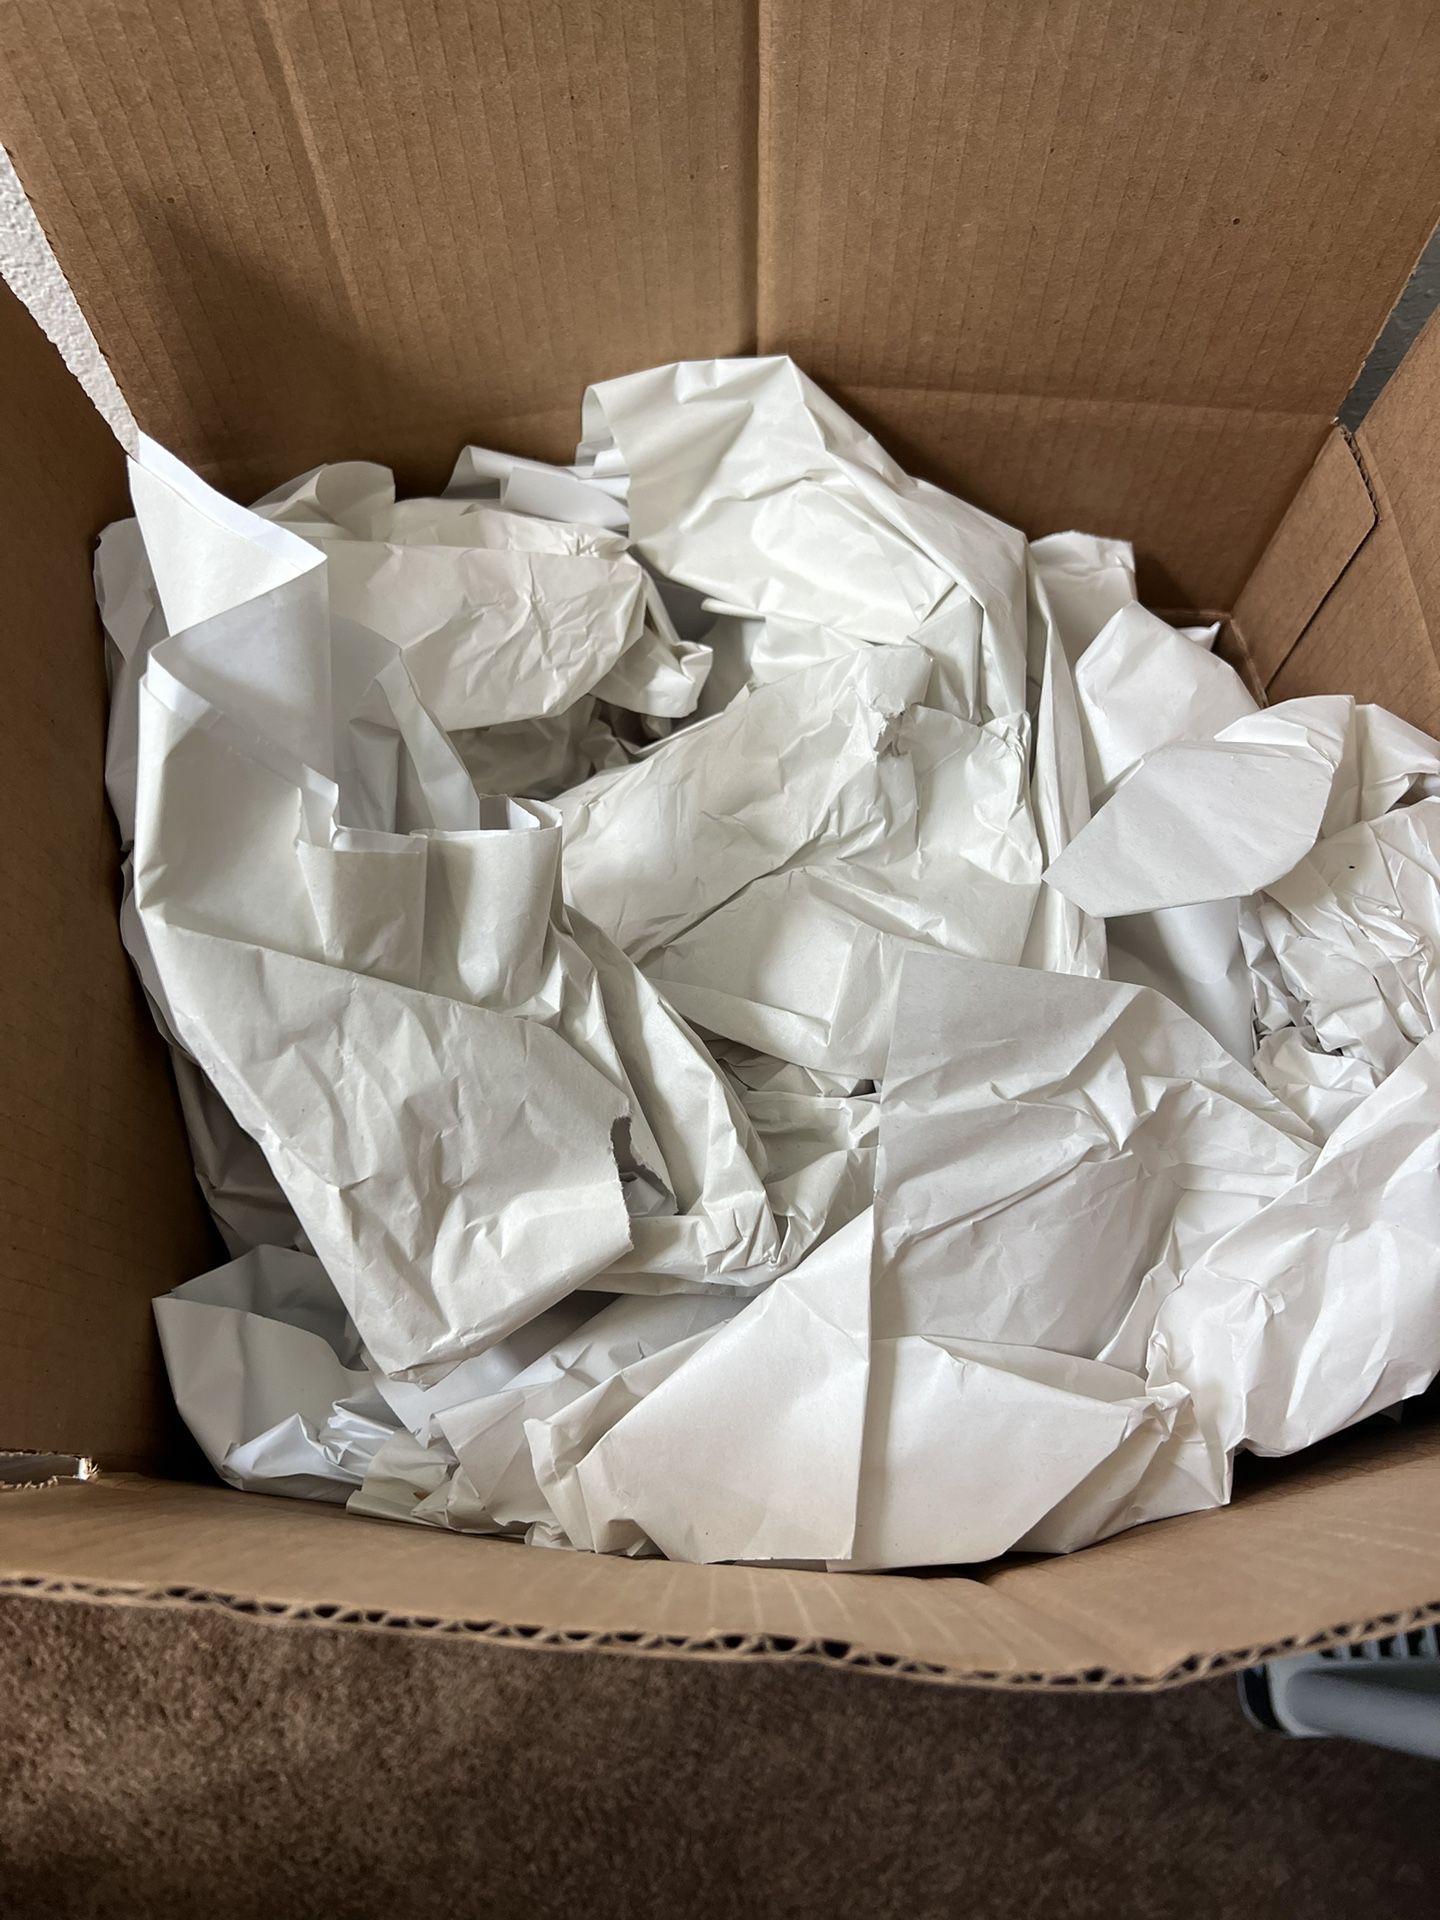 FREE Moving Boxes With Packing Paper